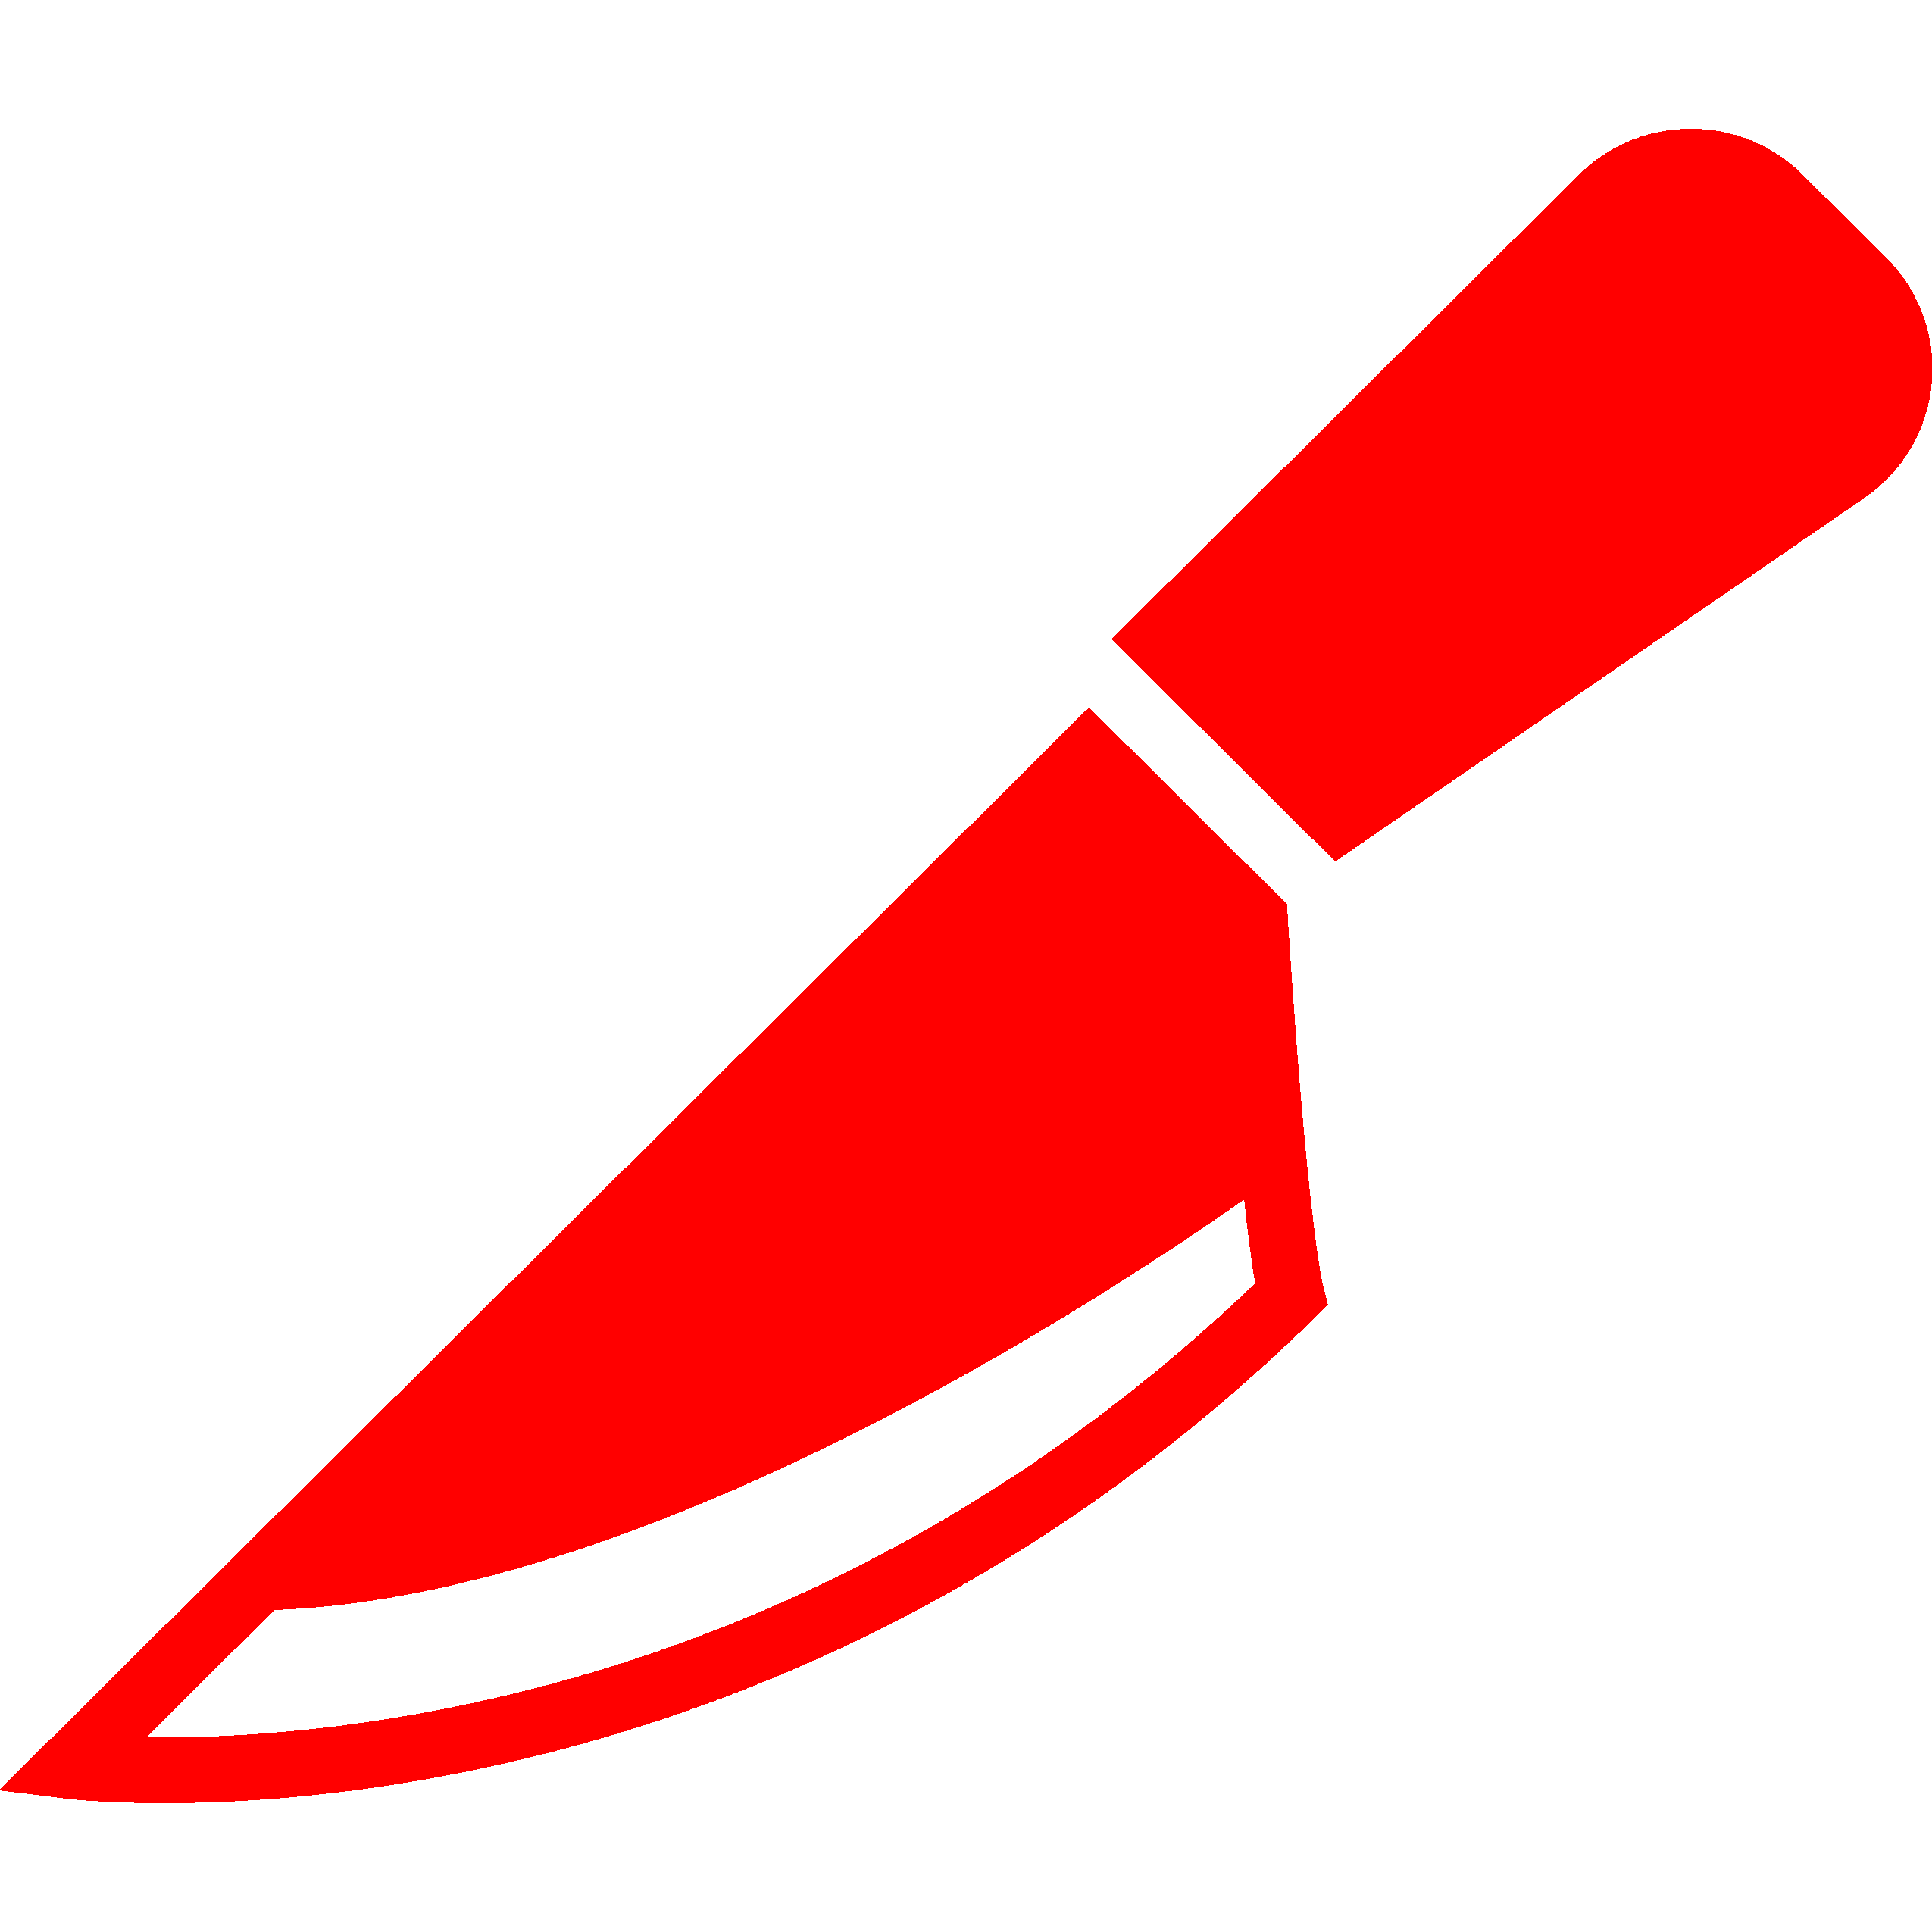 knife-outlined-kitchen-utensil-symbol_icon-icons.com_74344